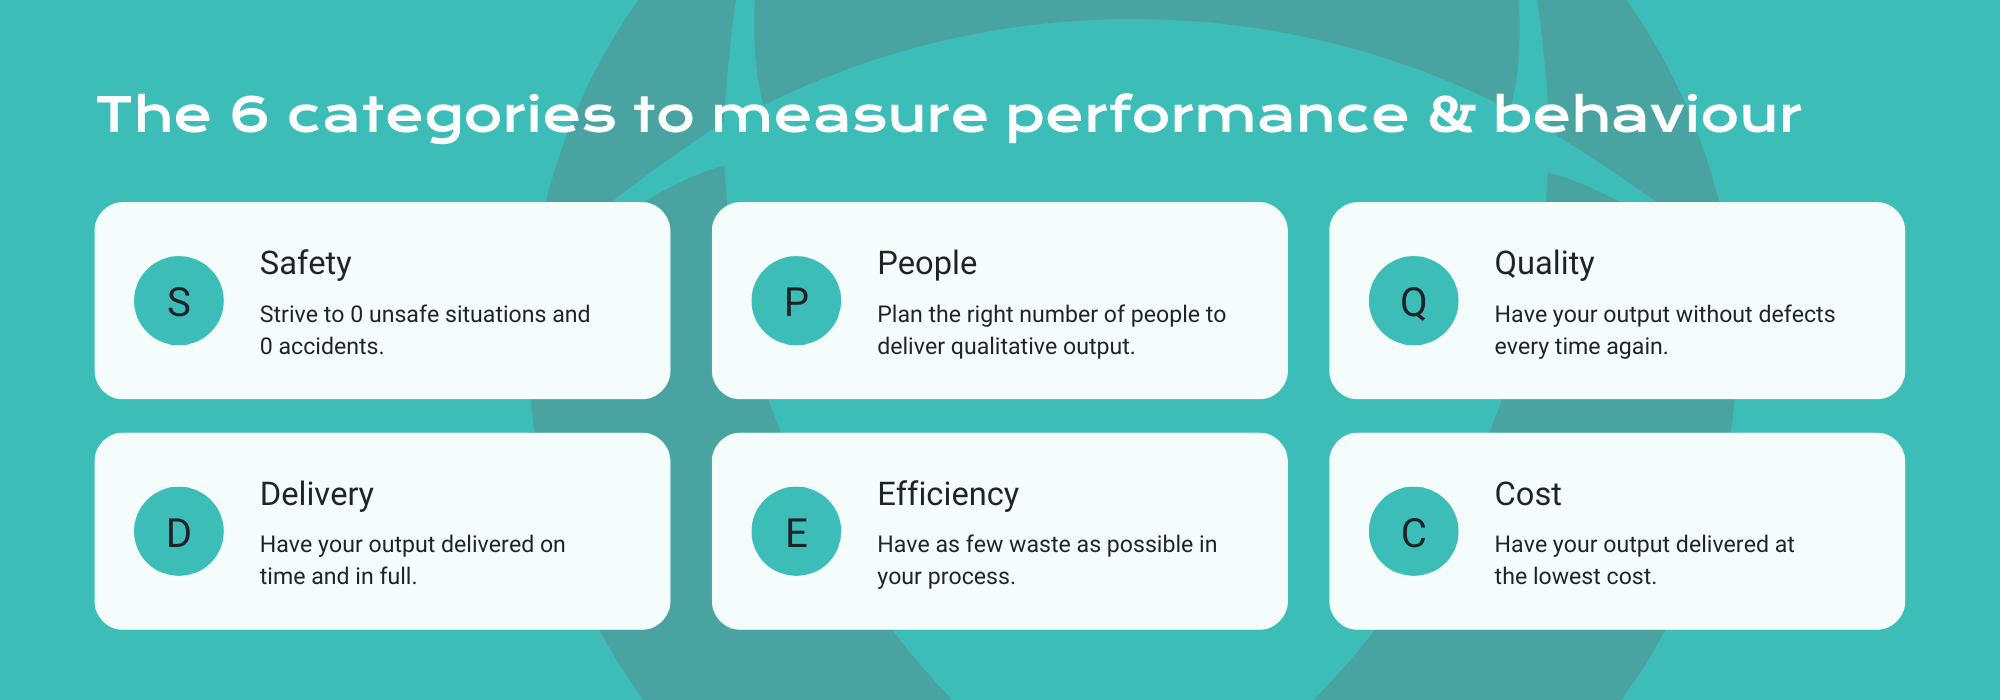 6 Categories to measure performance and behavior (2)